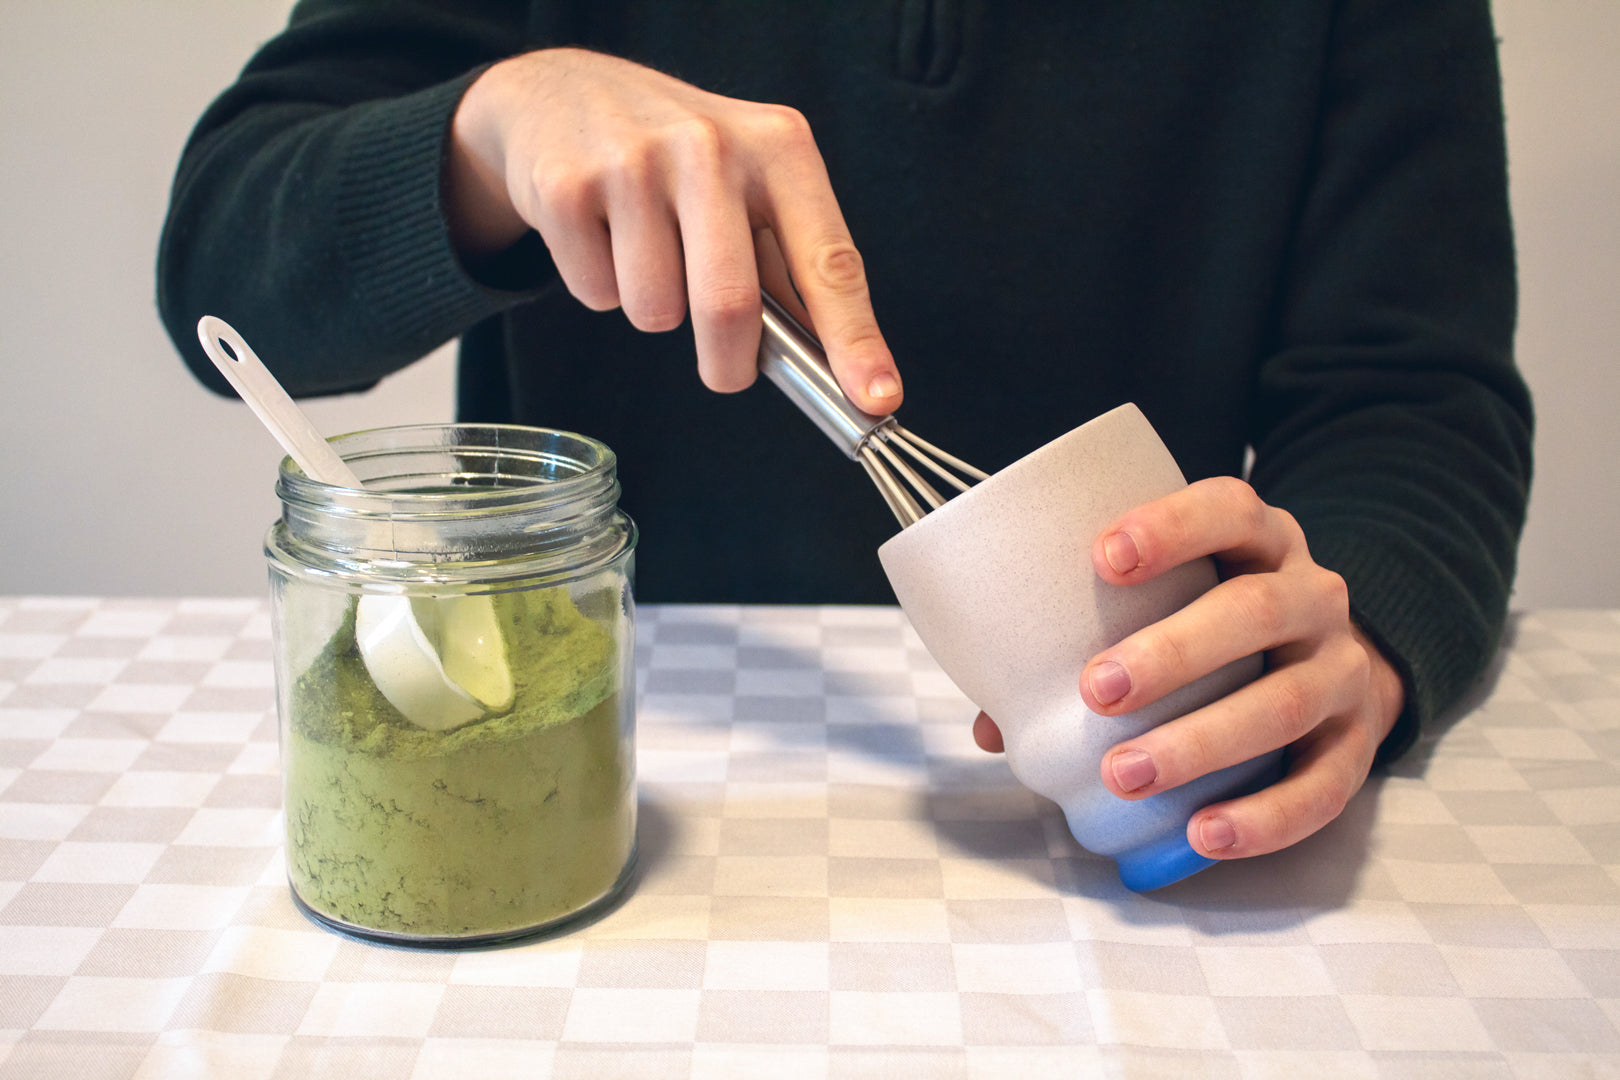 Hands holding a cup, demonstrating the whisking step in a matcha latte preparation guide.